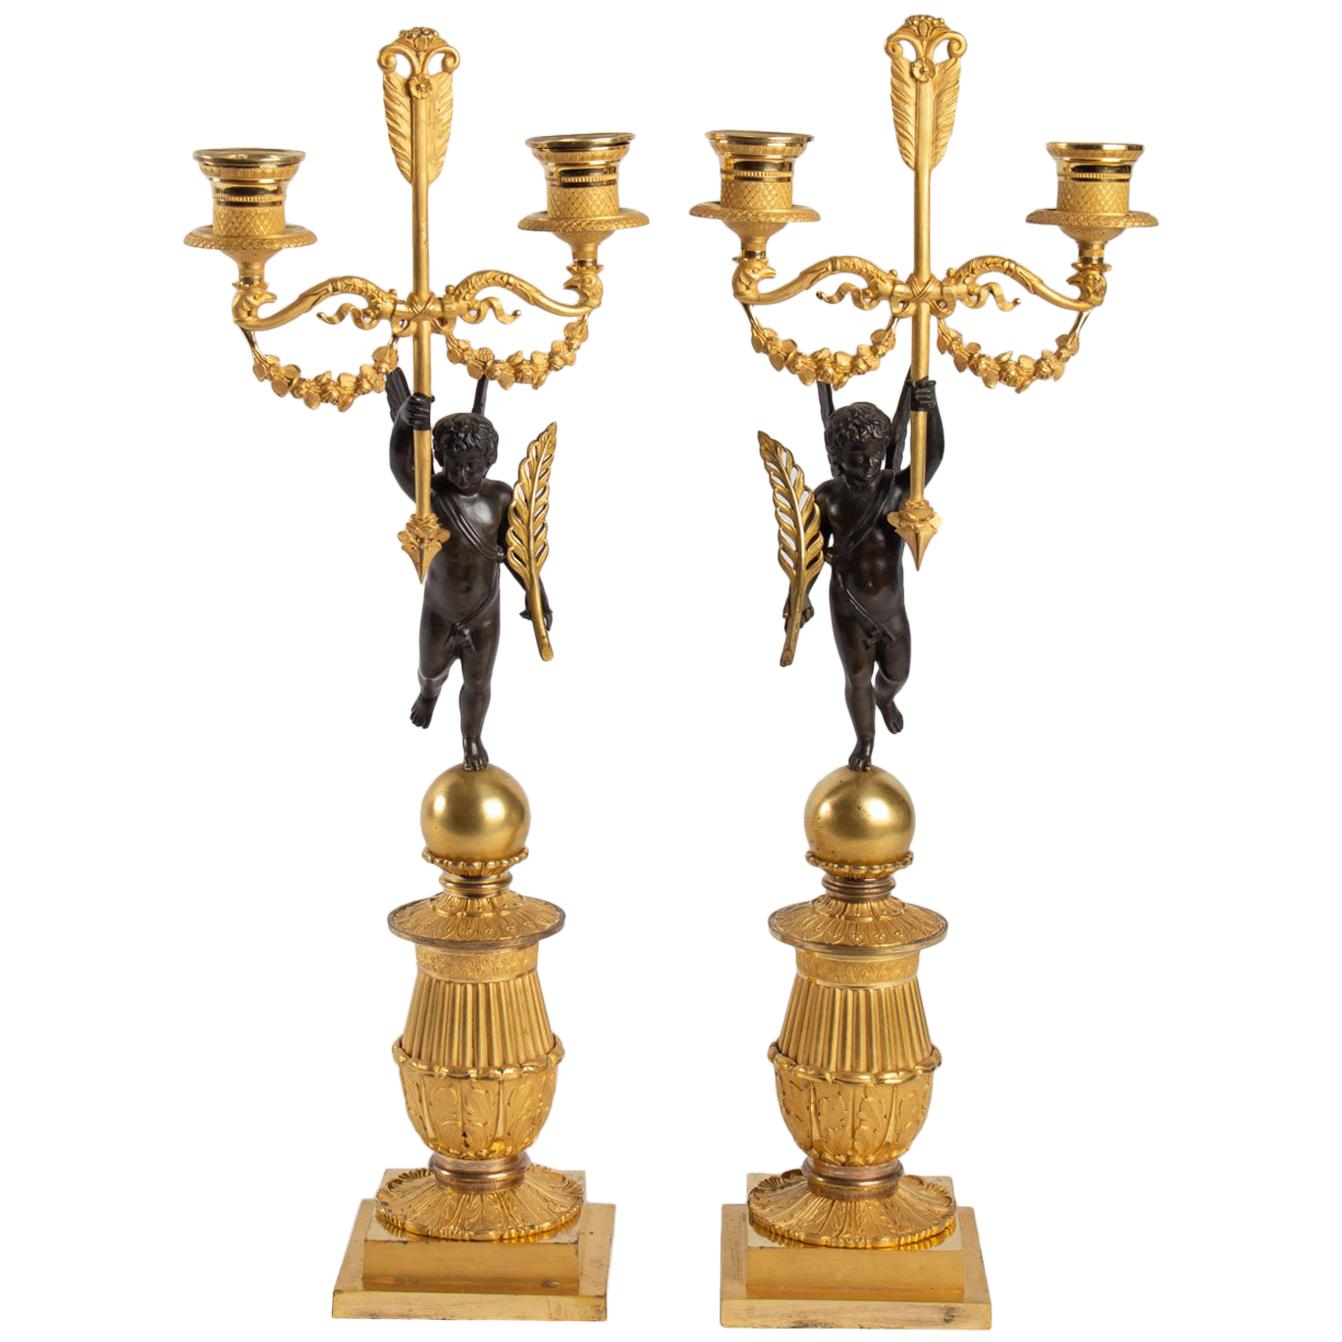 Pair of Candelabra in Gilt Bronze and Patinated, 19th Century